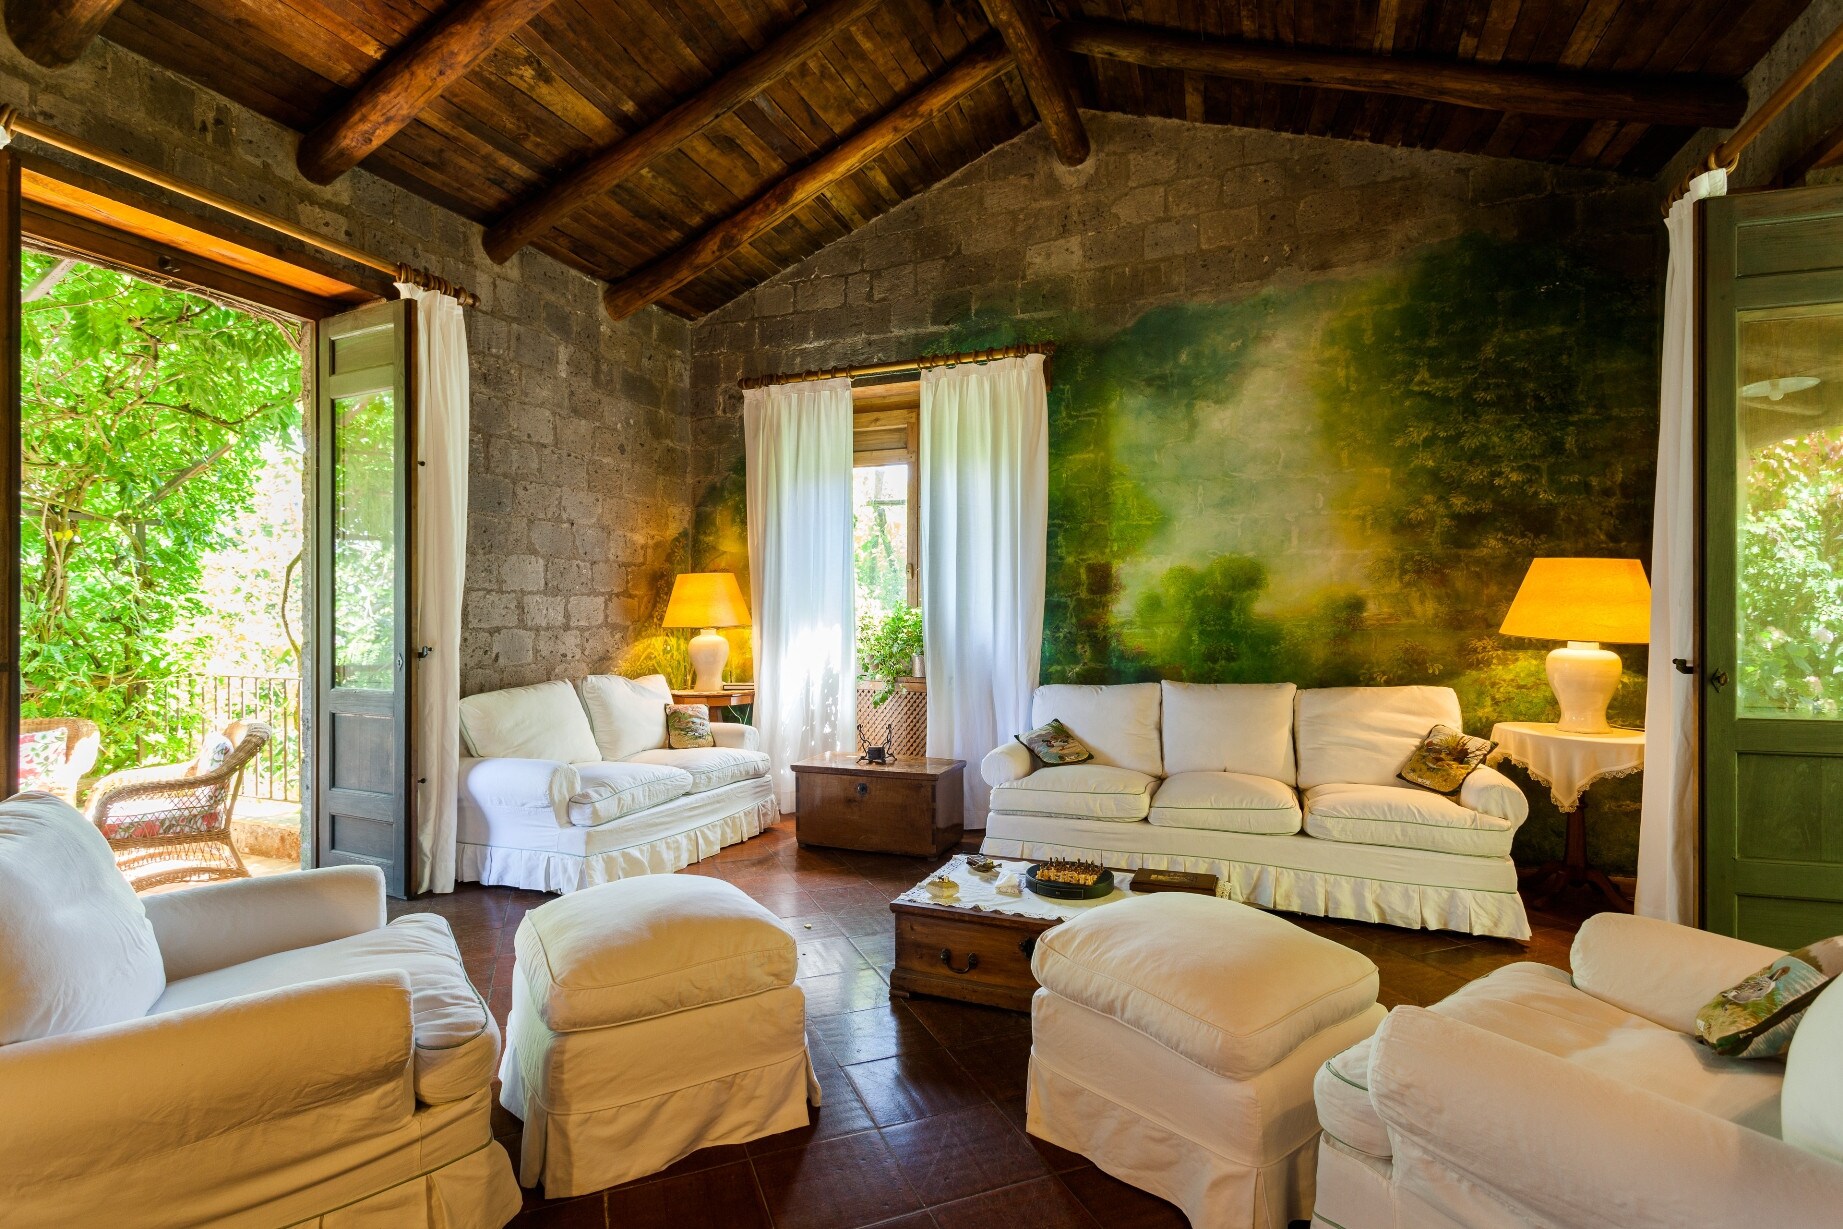 Property Image 1 - Villa Mellicata. Historical Villa with Magical Gardens and Heated Pool